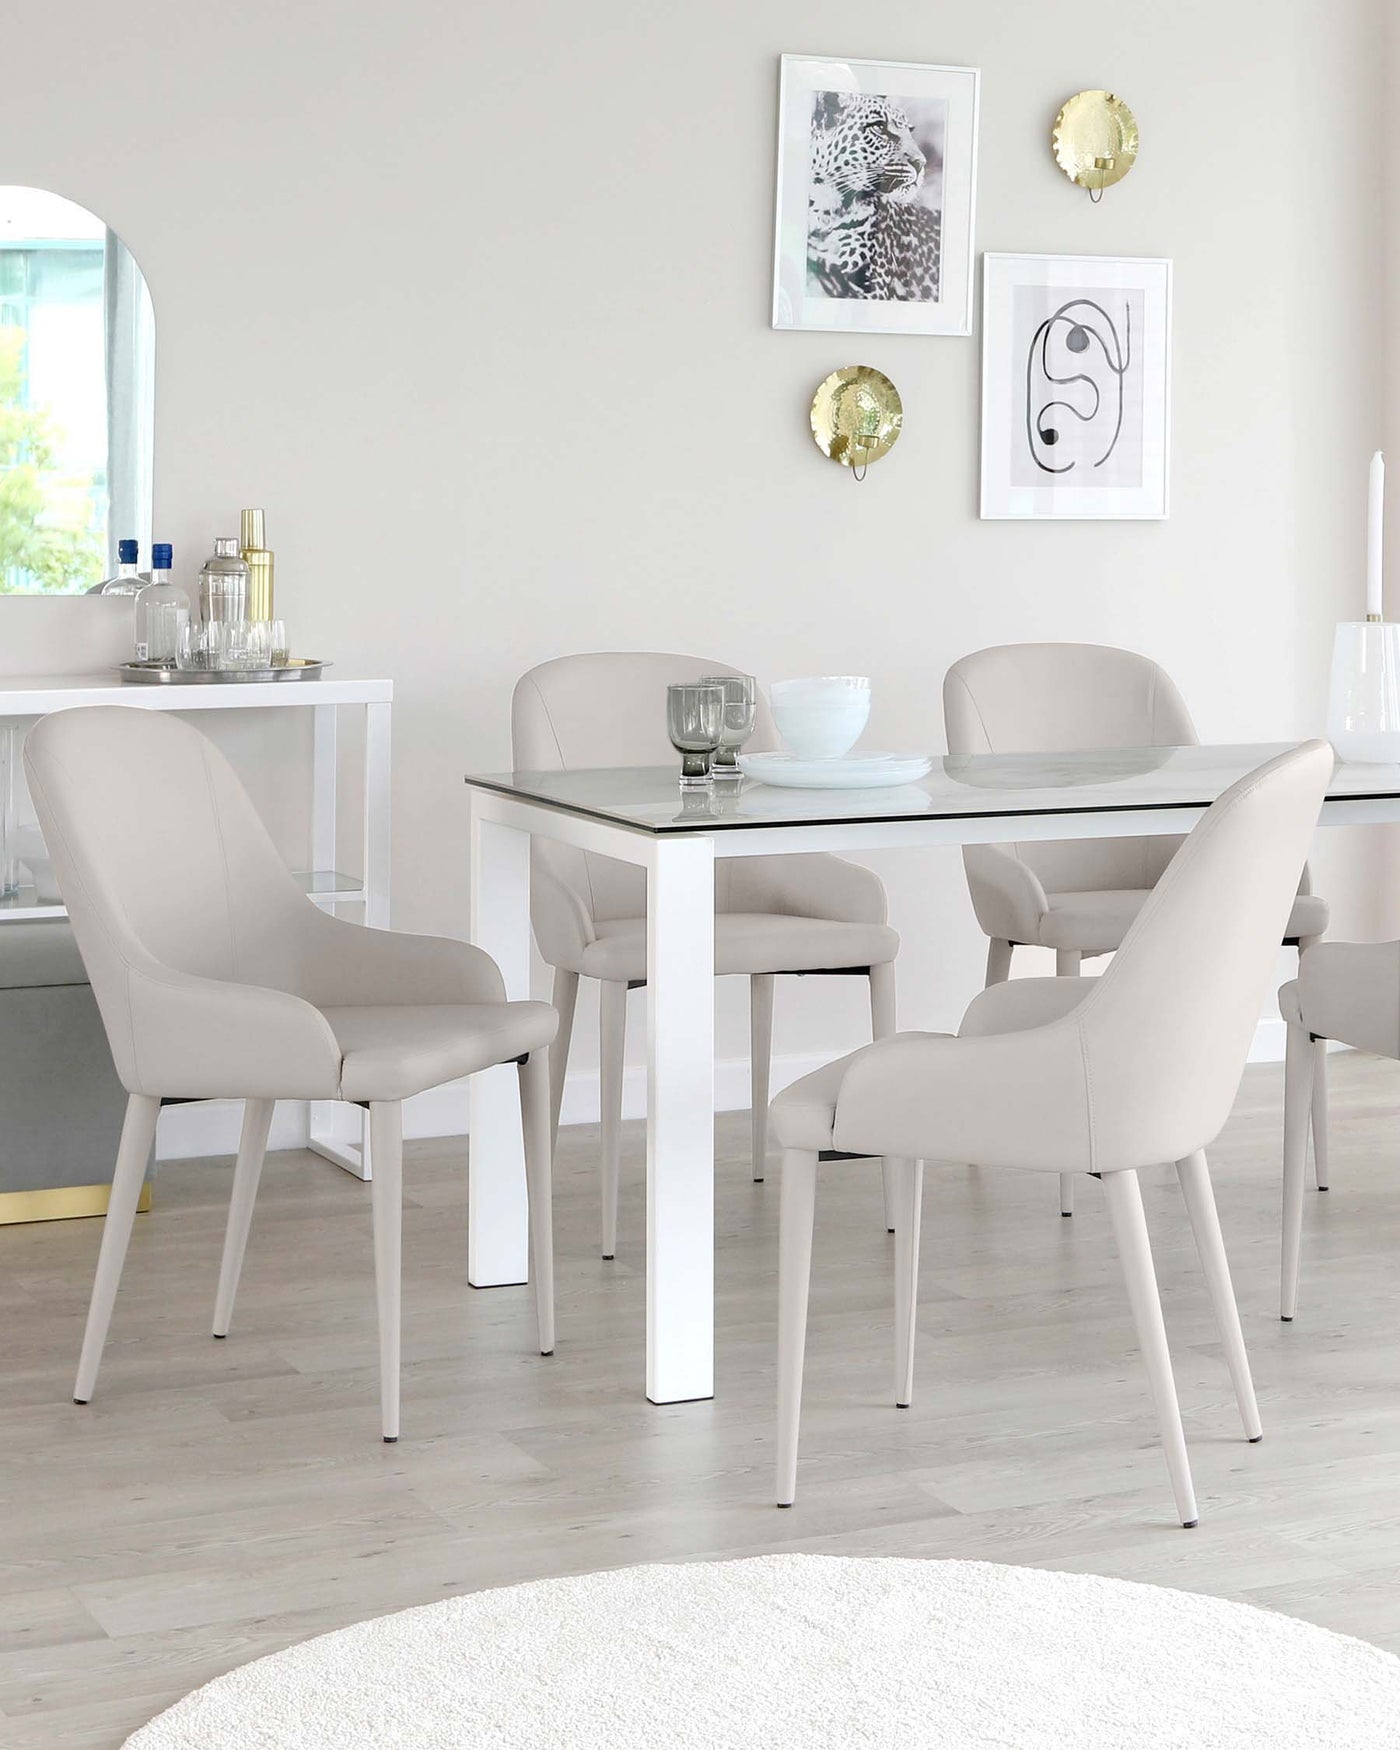 anton ceramic marble and kyro faux leather 6 seater dining set